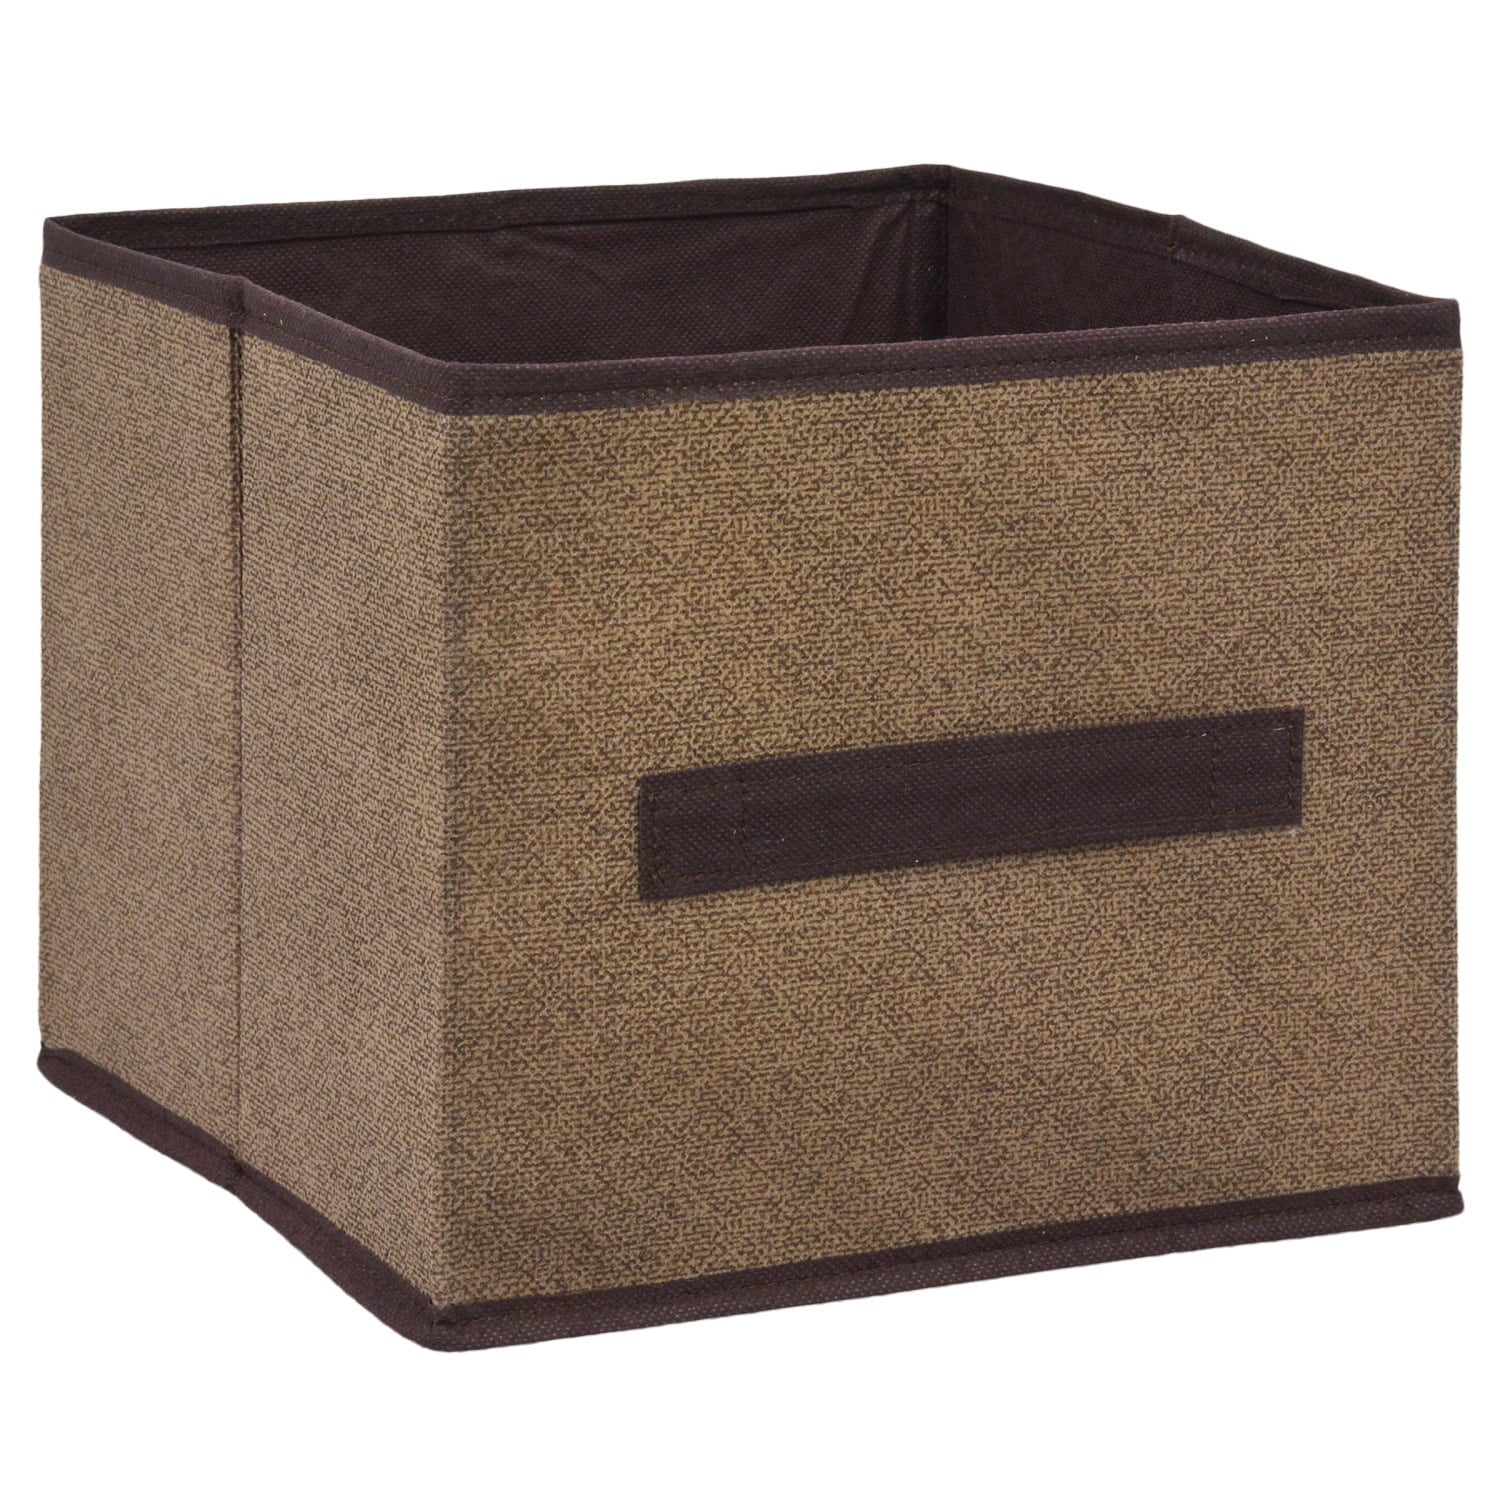 Set of 2 Tan Cream Collapsible Storage Cube Bins Containers 9x9x8 